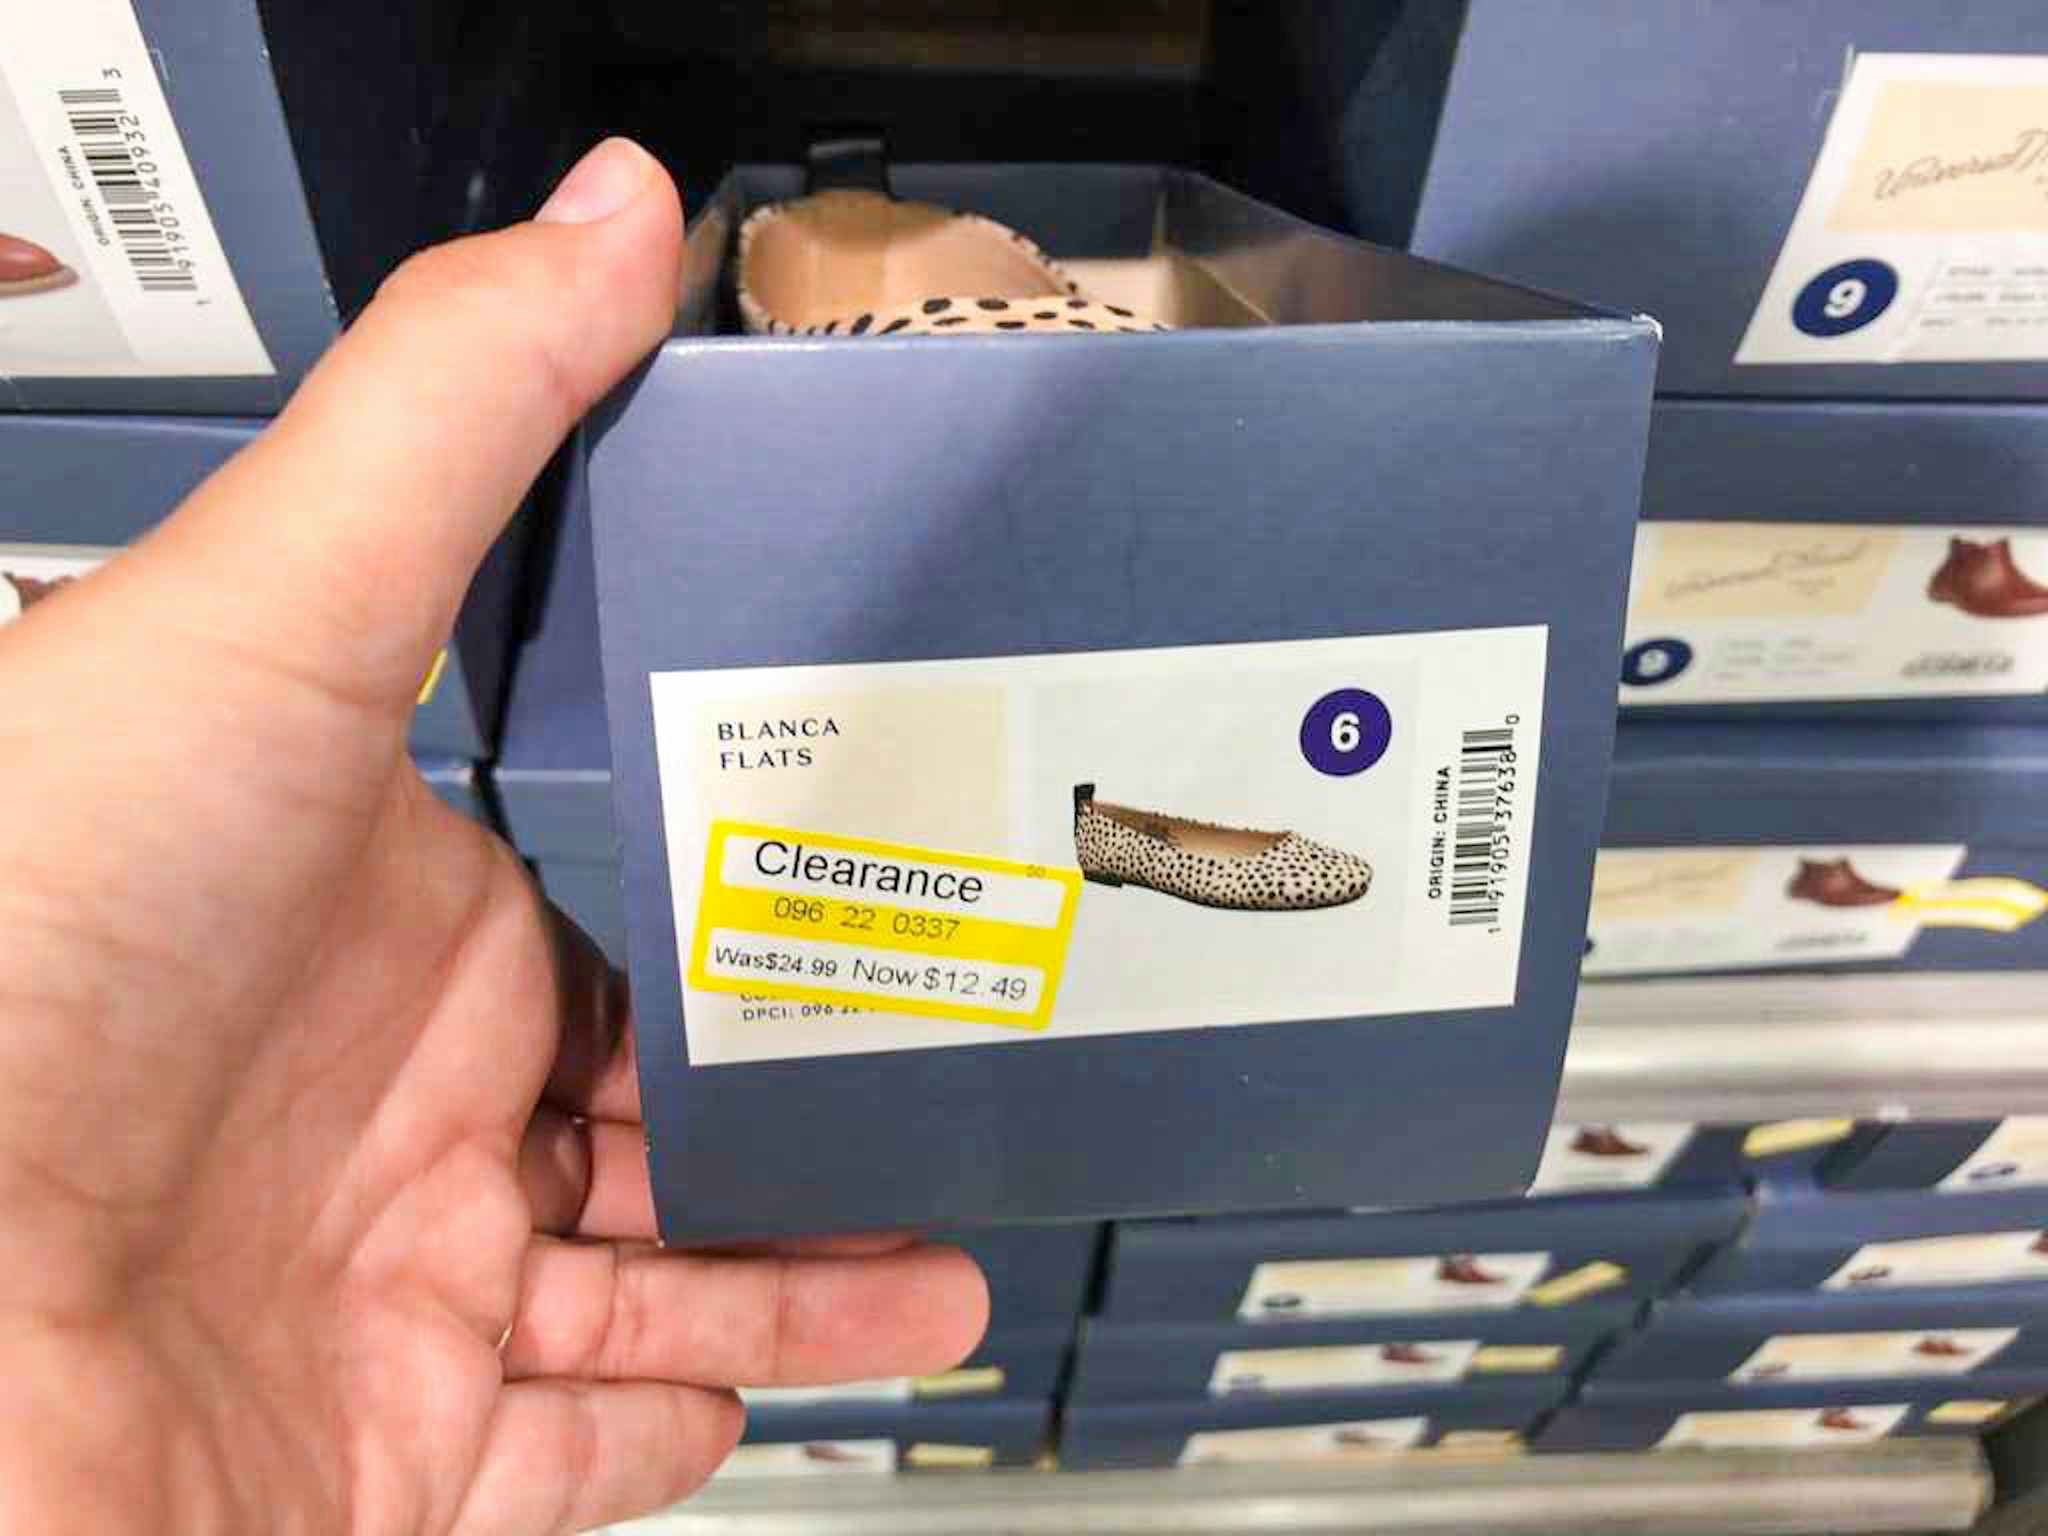 shoe clearance at target